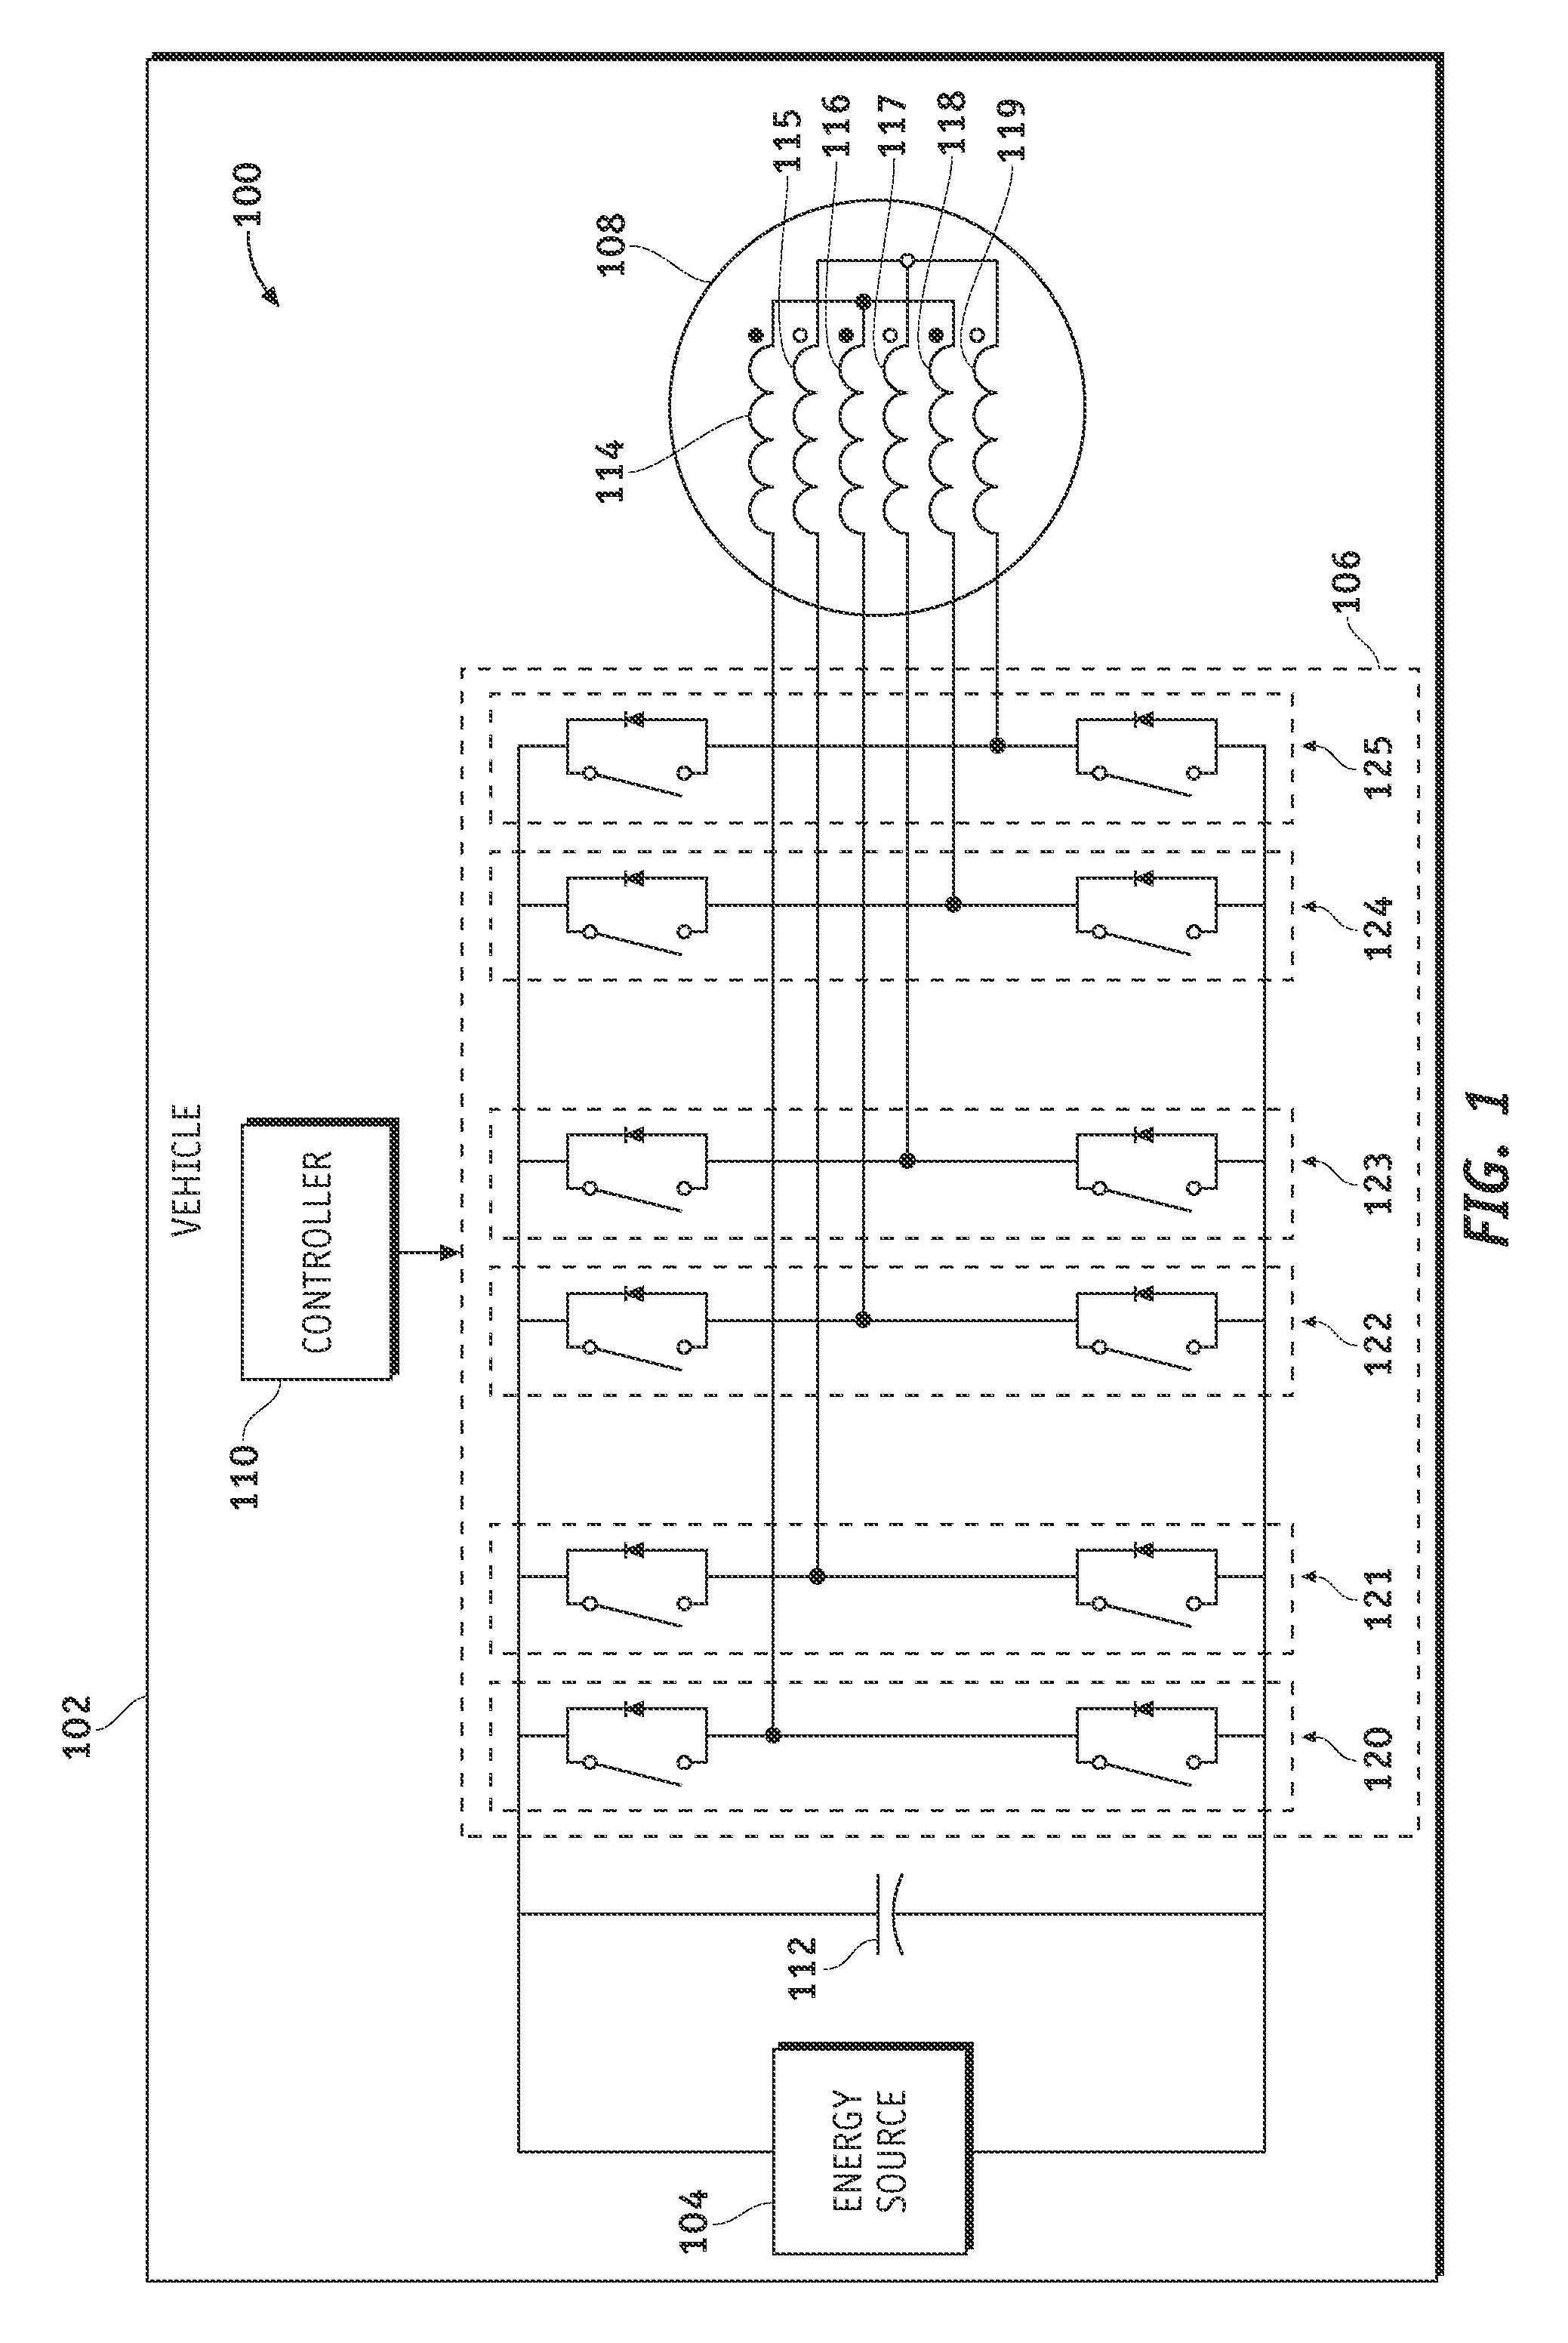 Electrical system using phase-shifted carrier signals and related operating methods